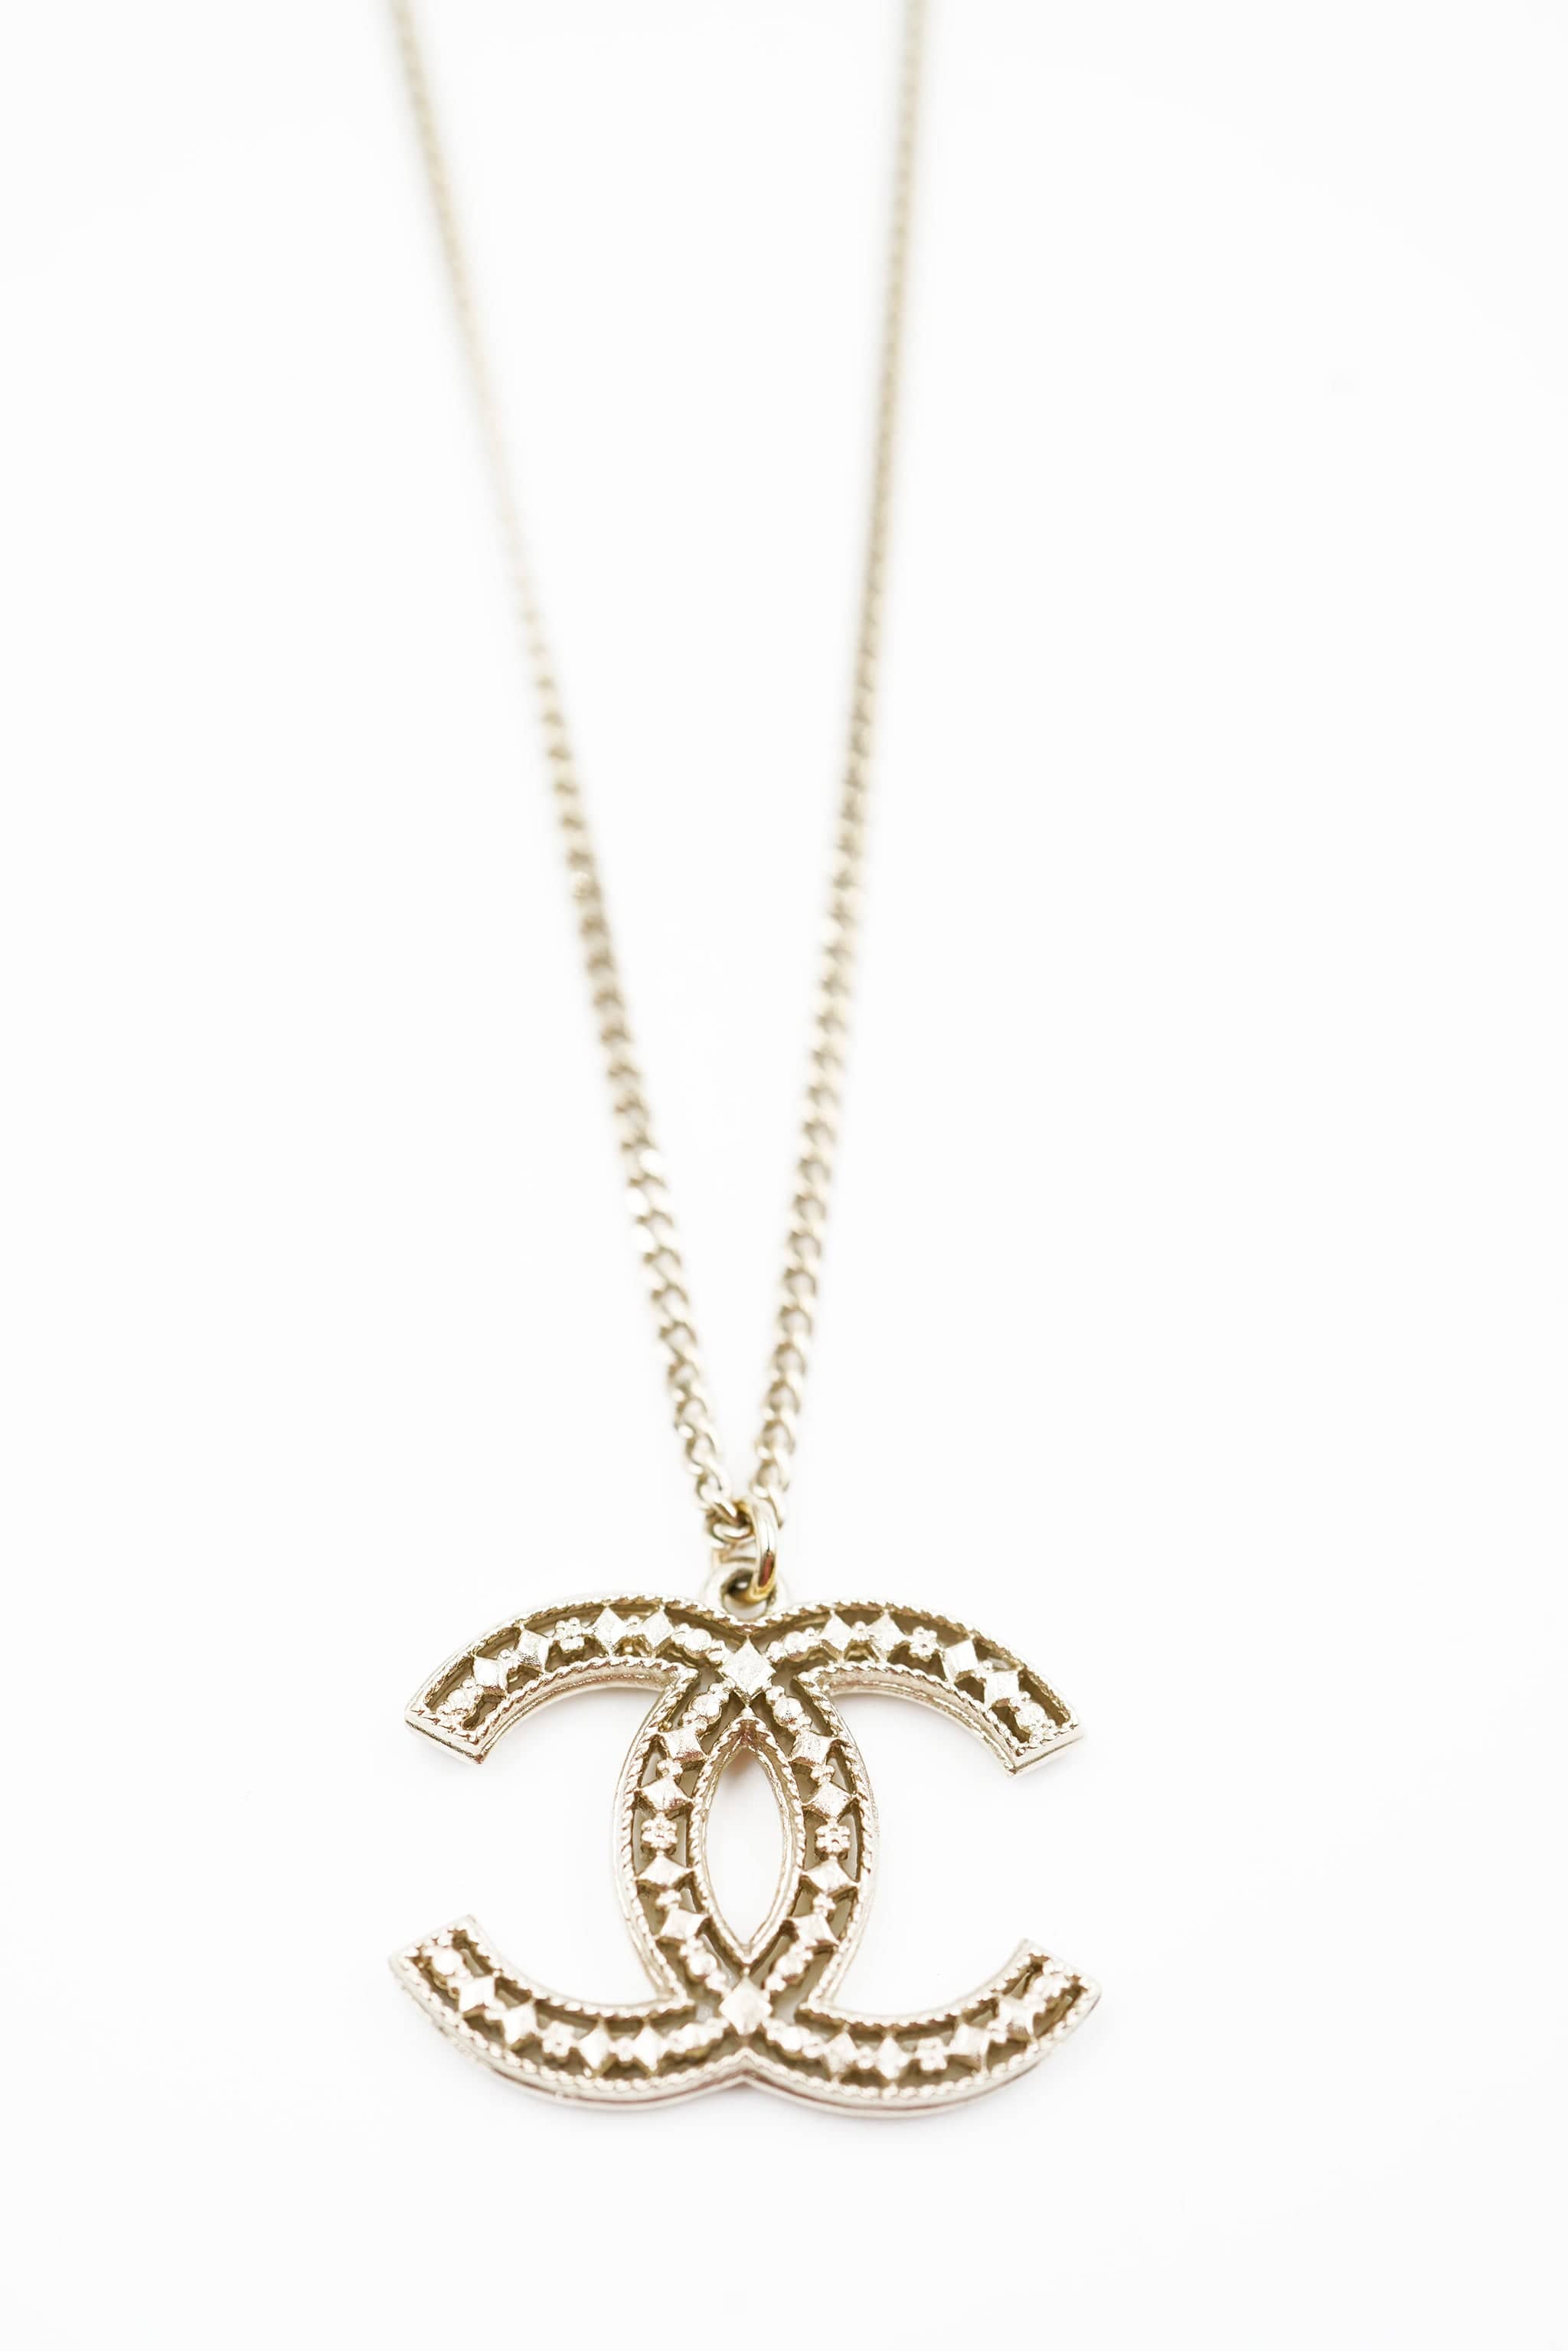 Chanel Chanel CC gold filagree cut out background - AWL4178